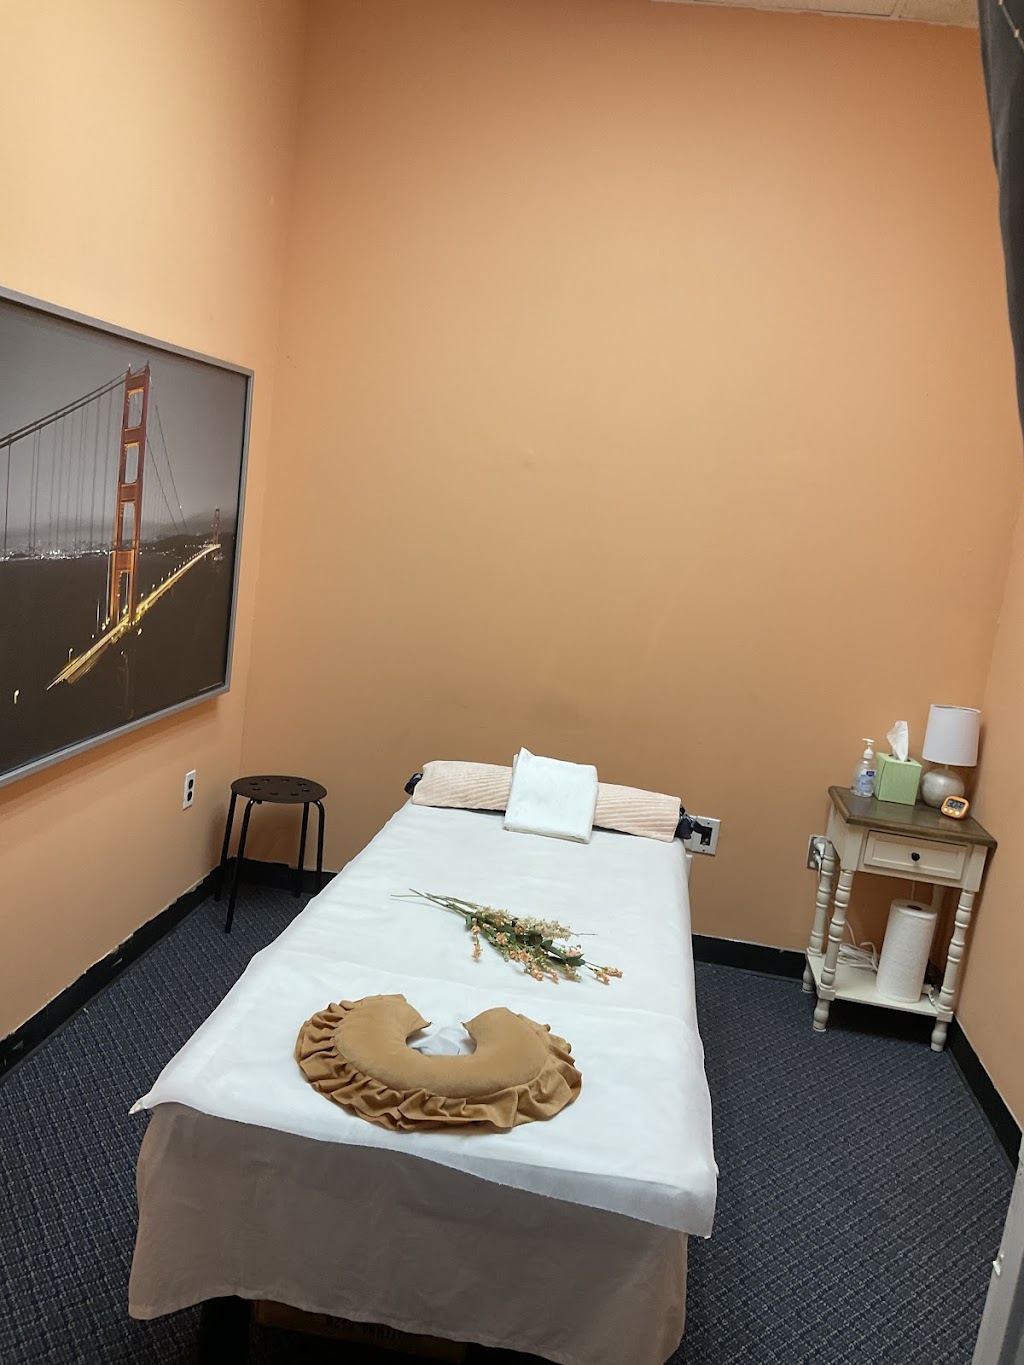 Sunny Days Massage | 1248 Lincoln Hwy, Langhorne, PA 19047 | Phone: (215) 550-7866